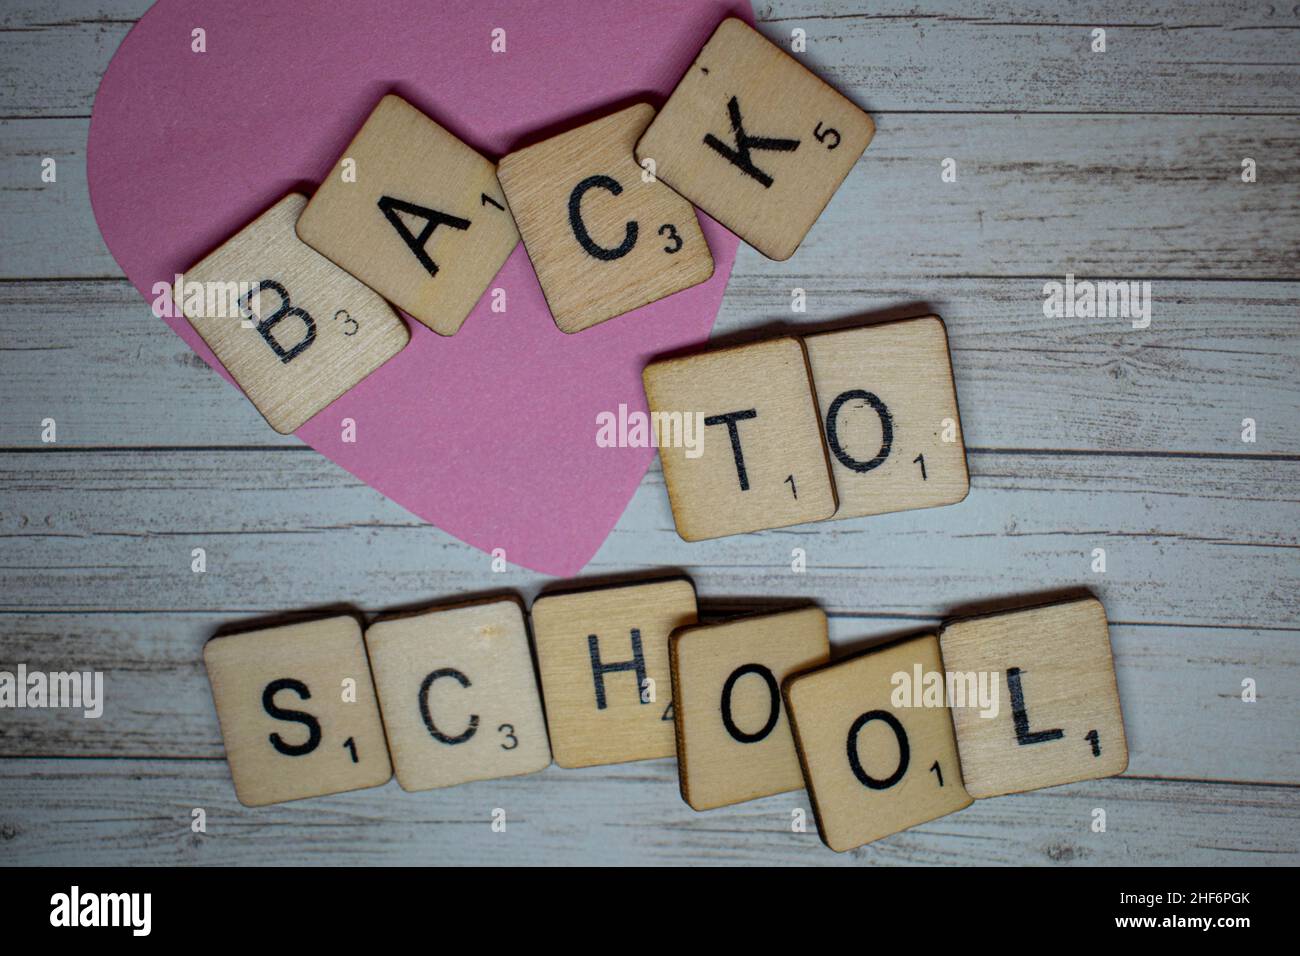 Back to School concept. Back to school spelled out on scrabble letters on a rustic wooden background. Preparation for going back to school after the s Stock Photo